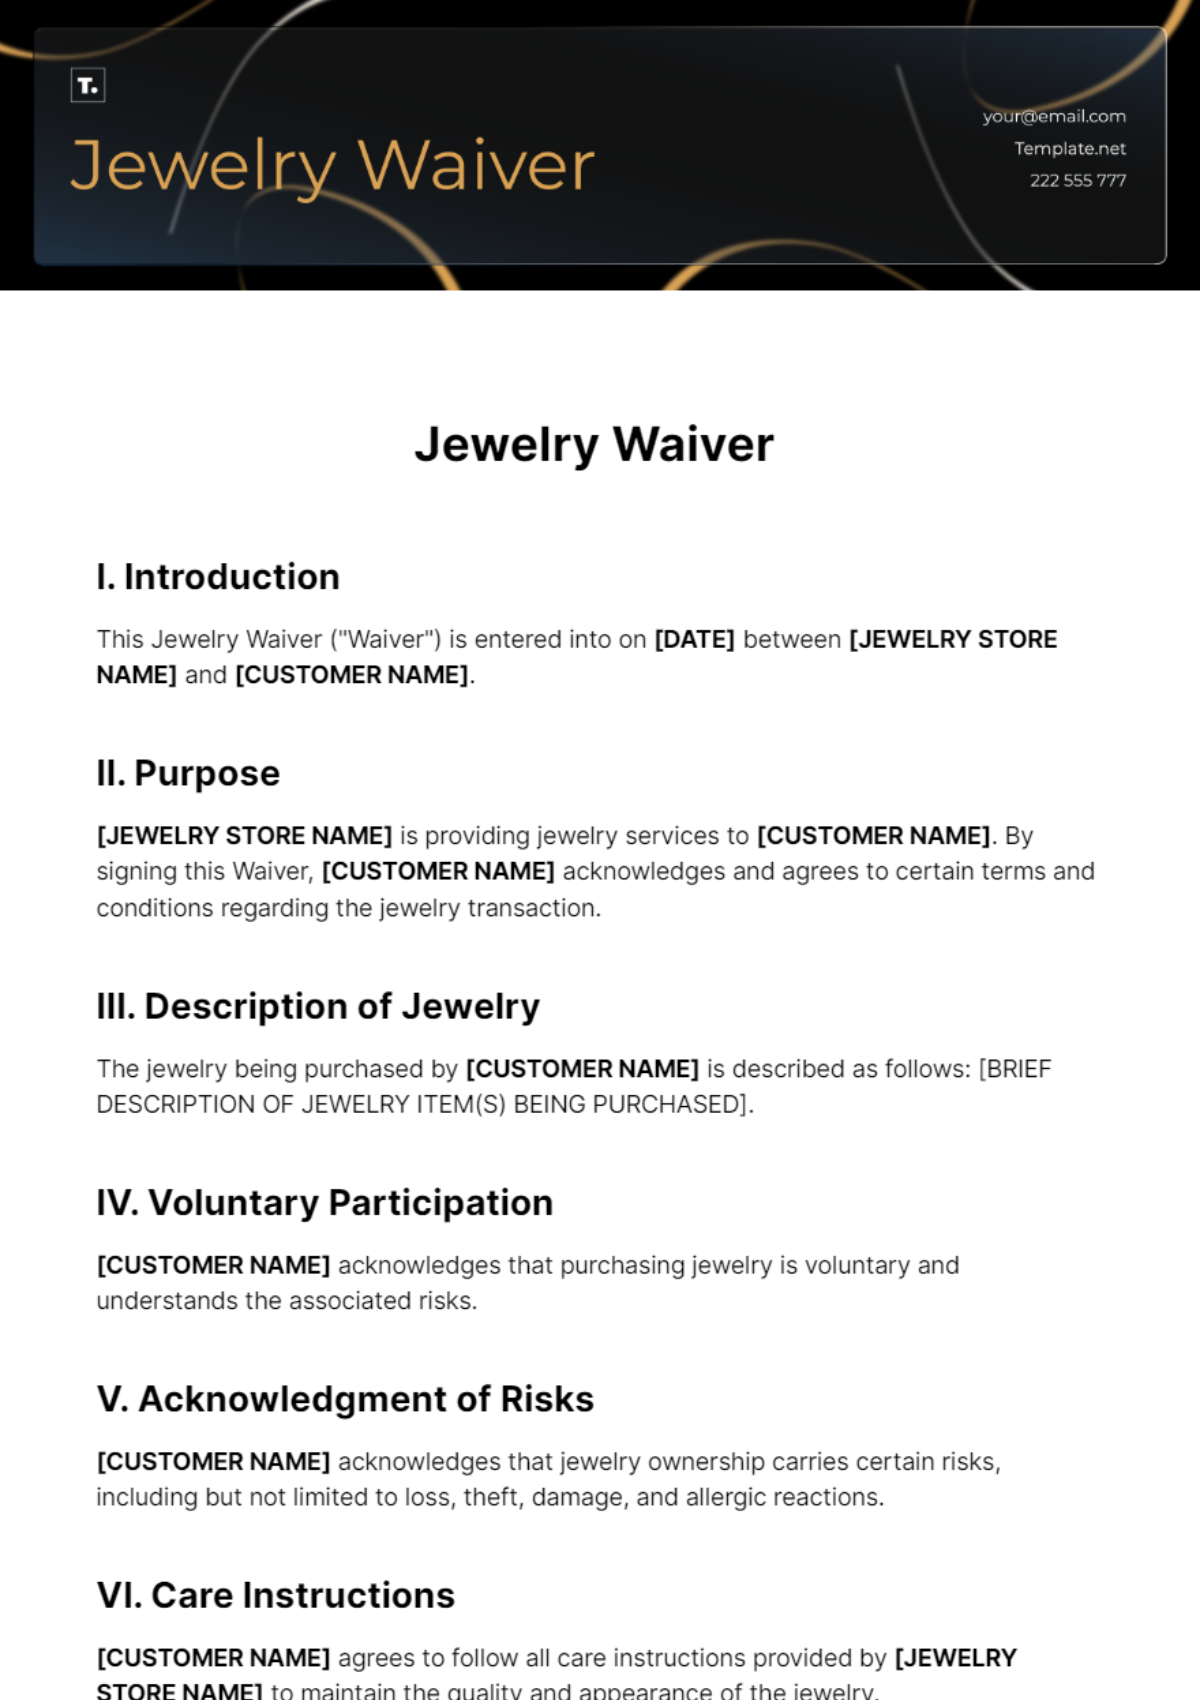 Jewelry Waiver Template